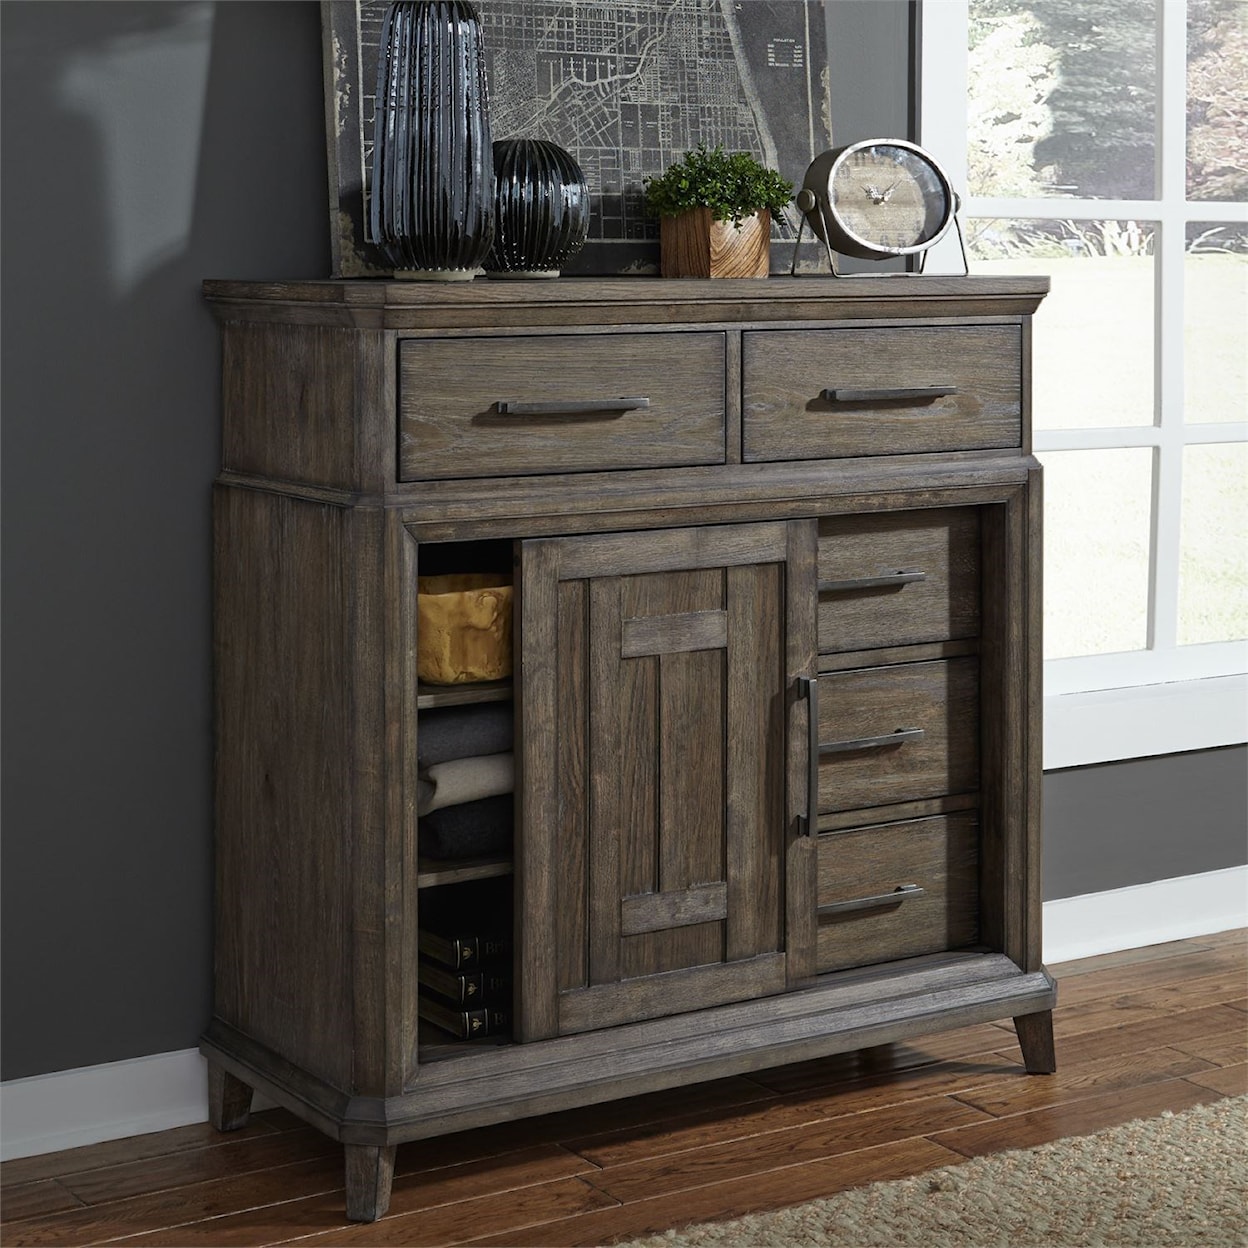 Liberty Furniture Artisan Prairie 5 Drawer Chest with Doors